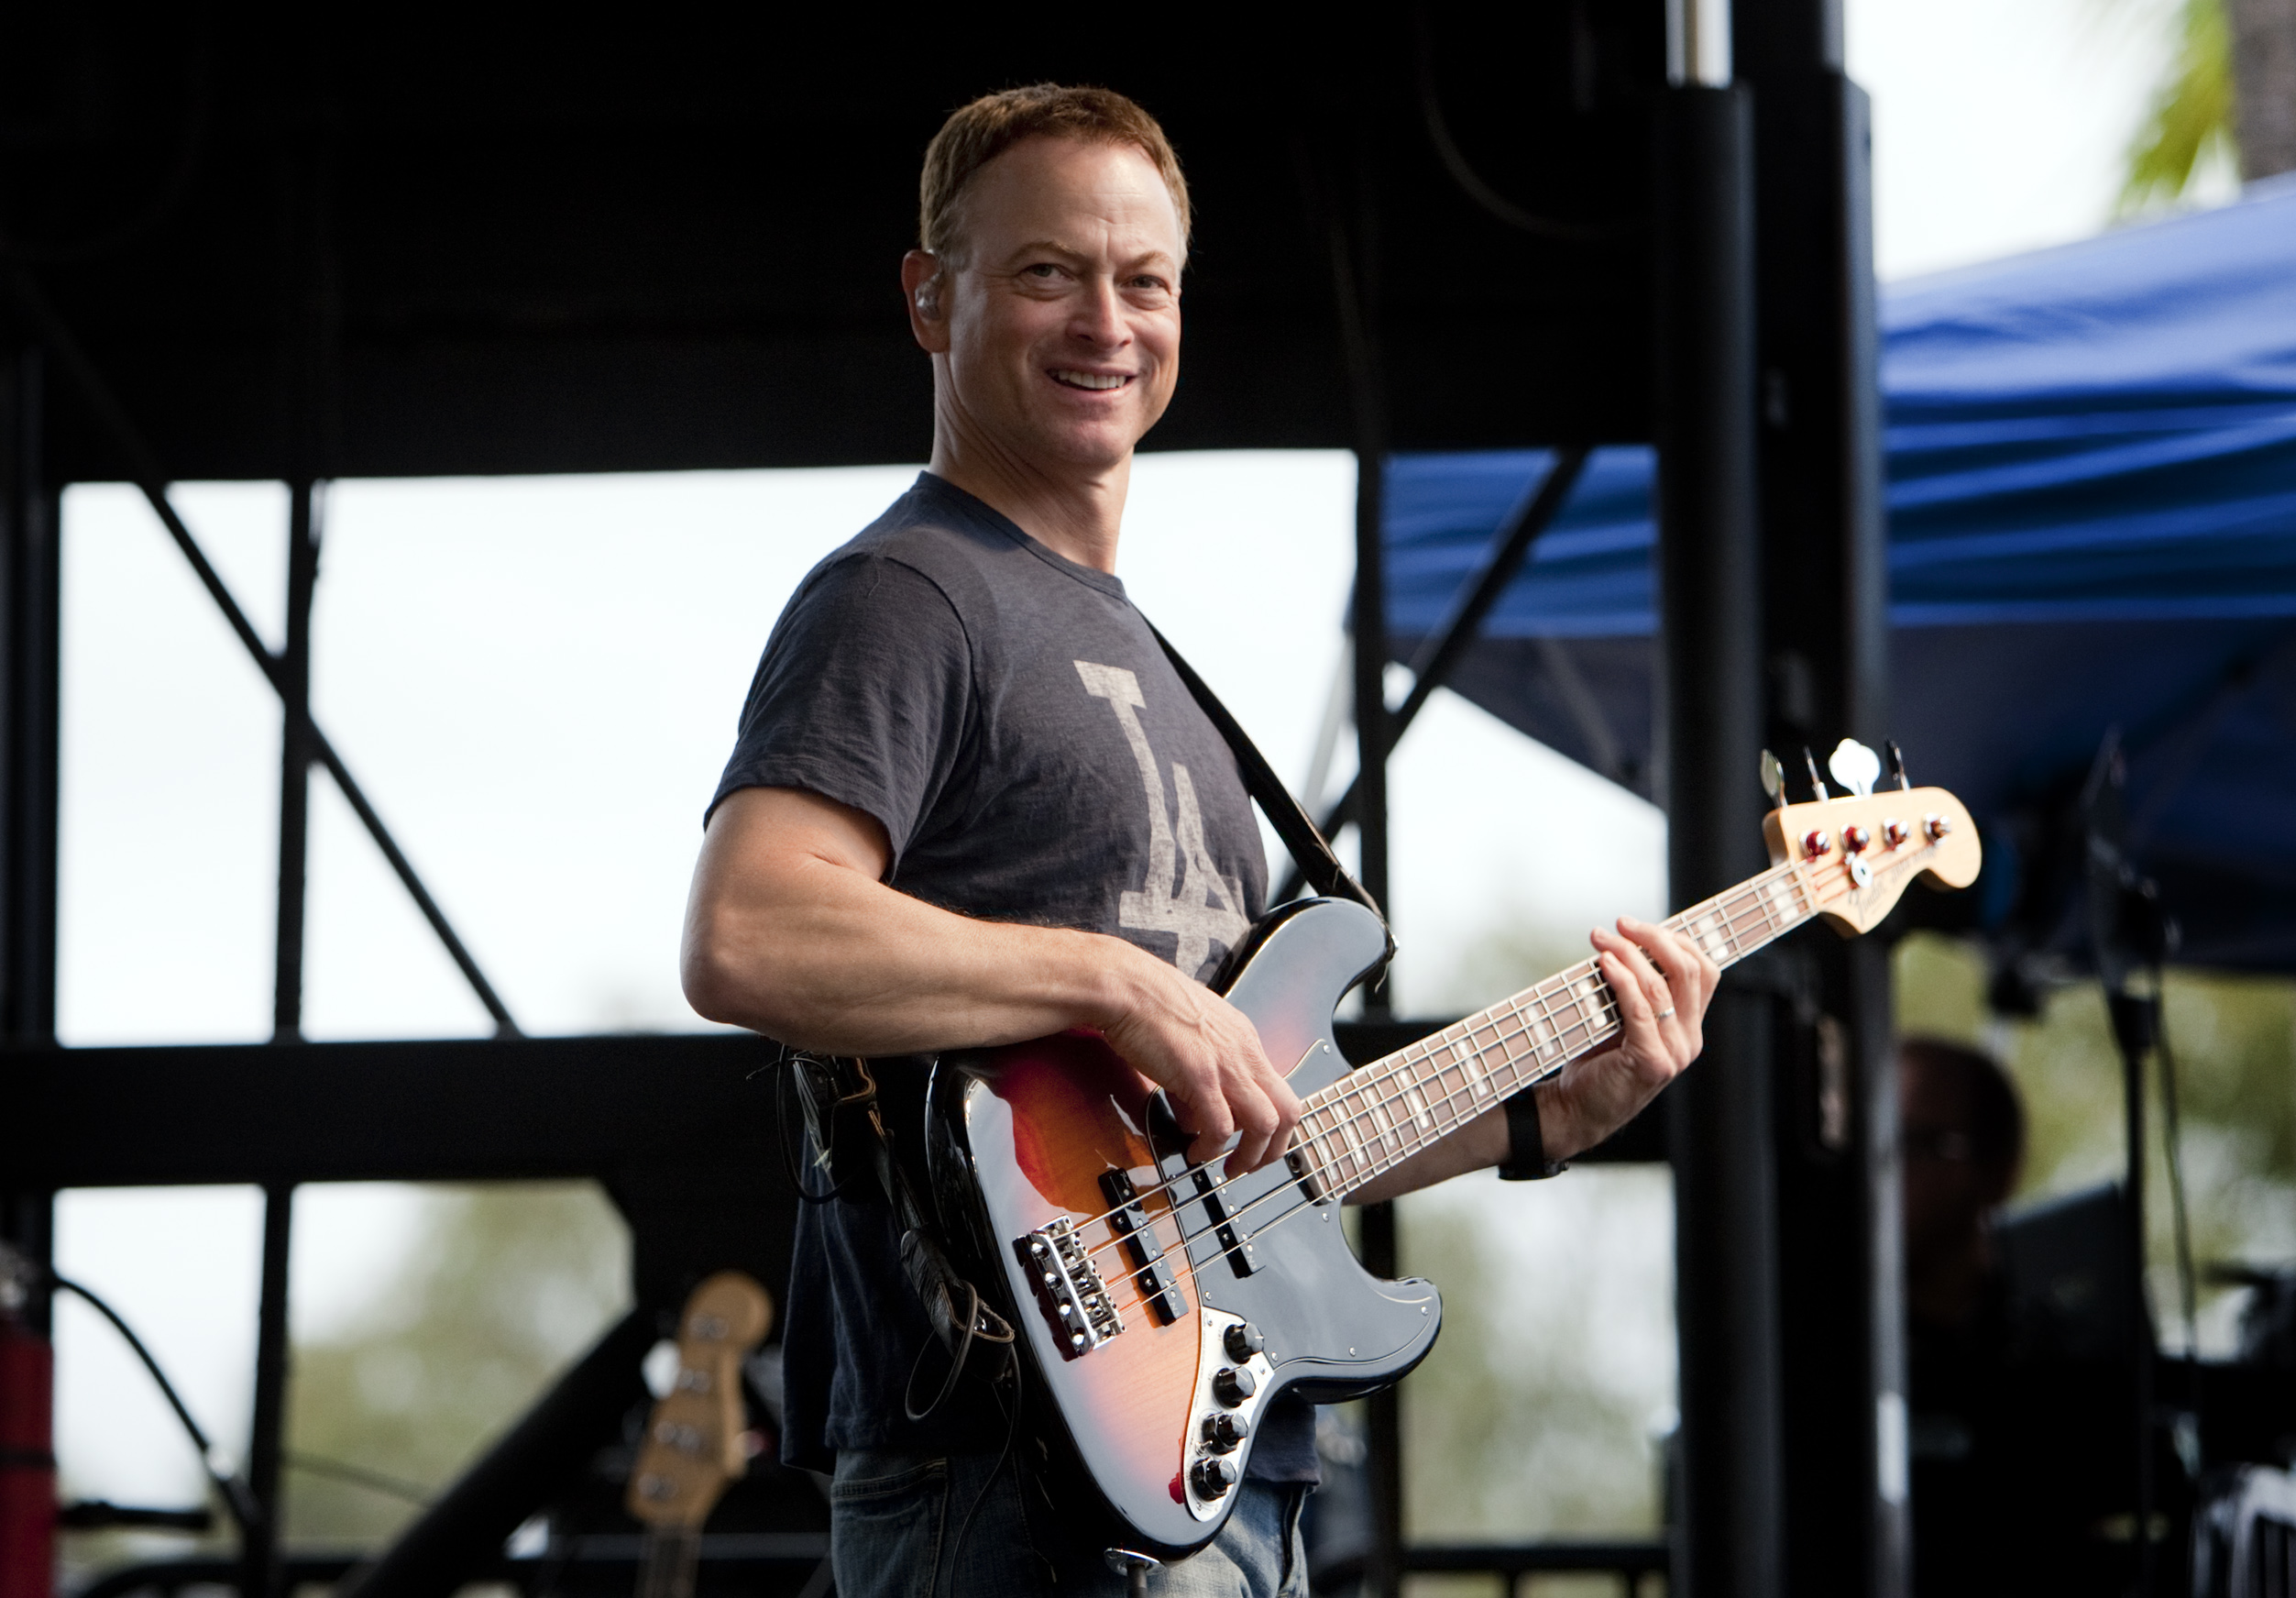 Gary Sinise on bass performs with his Lt. Dan Band entertaining wounded warriors, their families and hospital staff in front of the Naval Medical Center in San Diego on October, 20, 2012 | Source: Getty Images